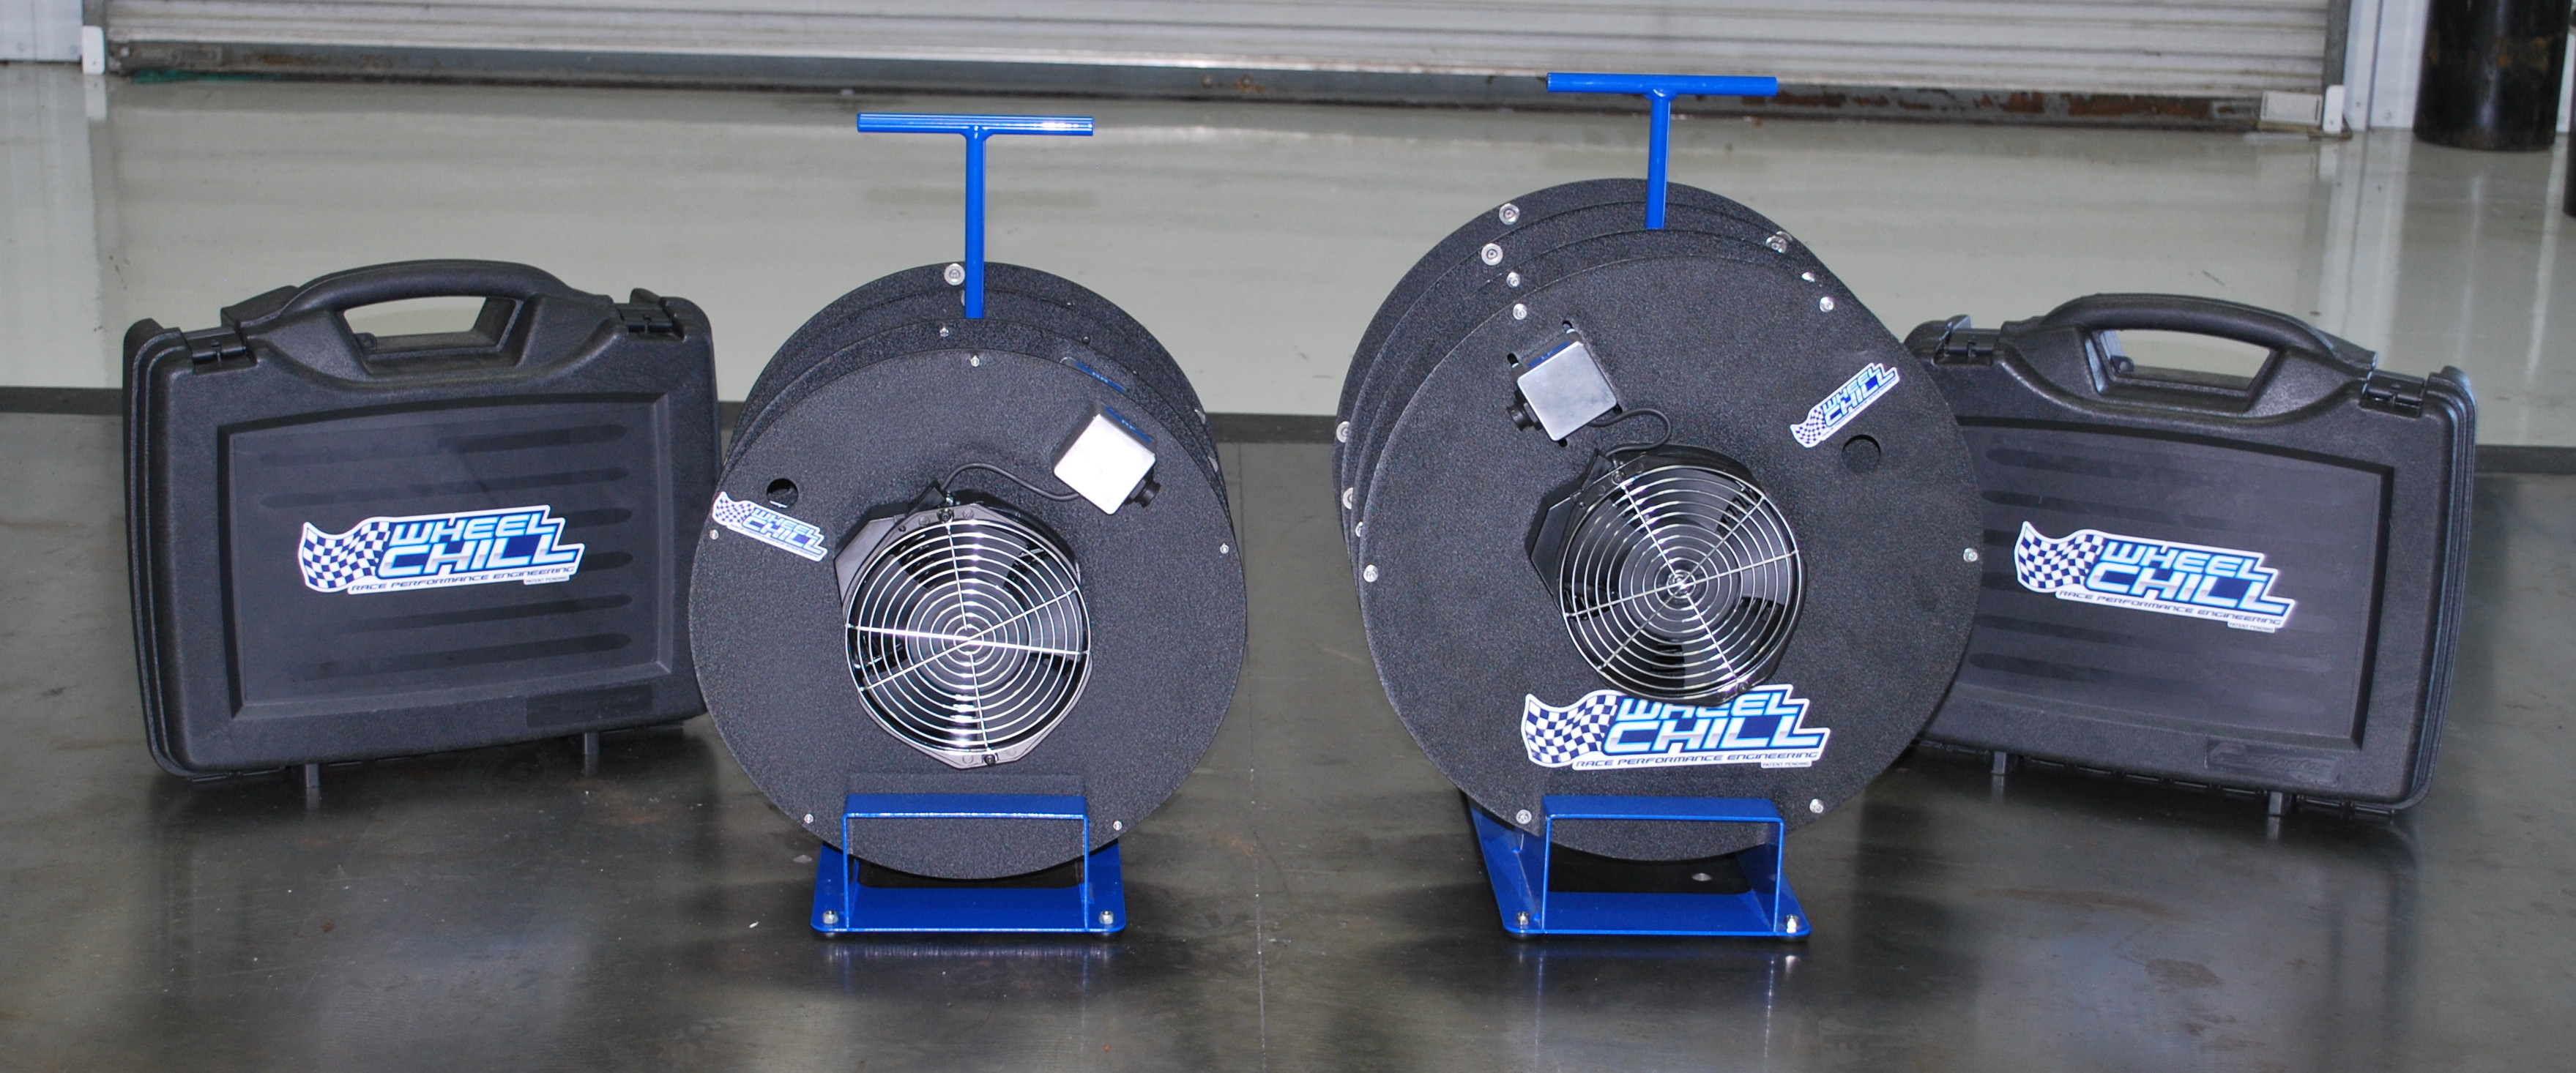 A product lineup of Wheel Chill products